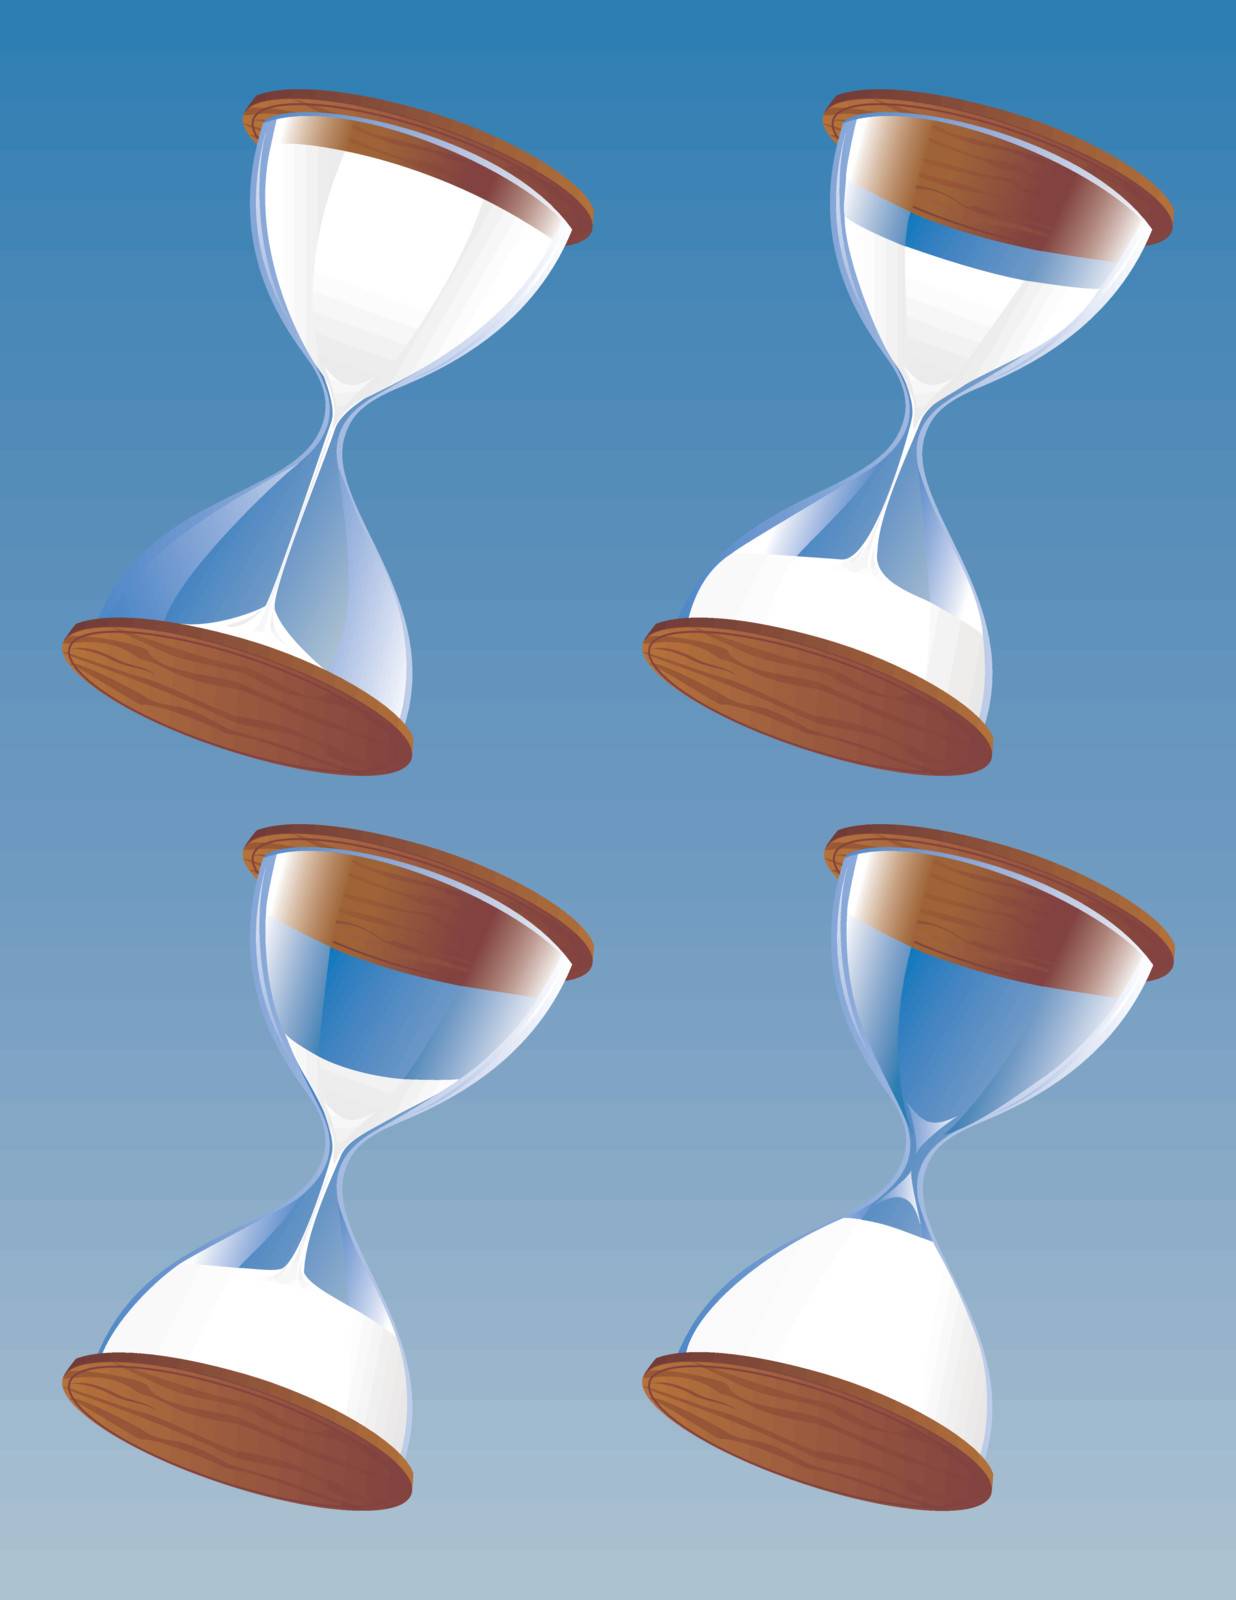 Hourglass in a set of four at different steps in time